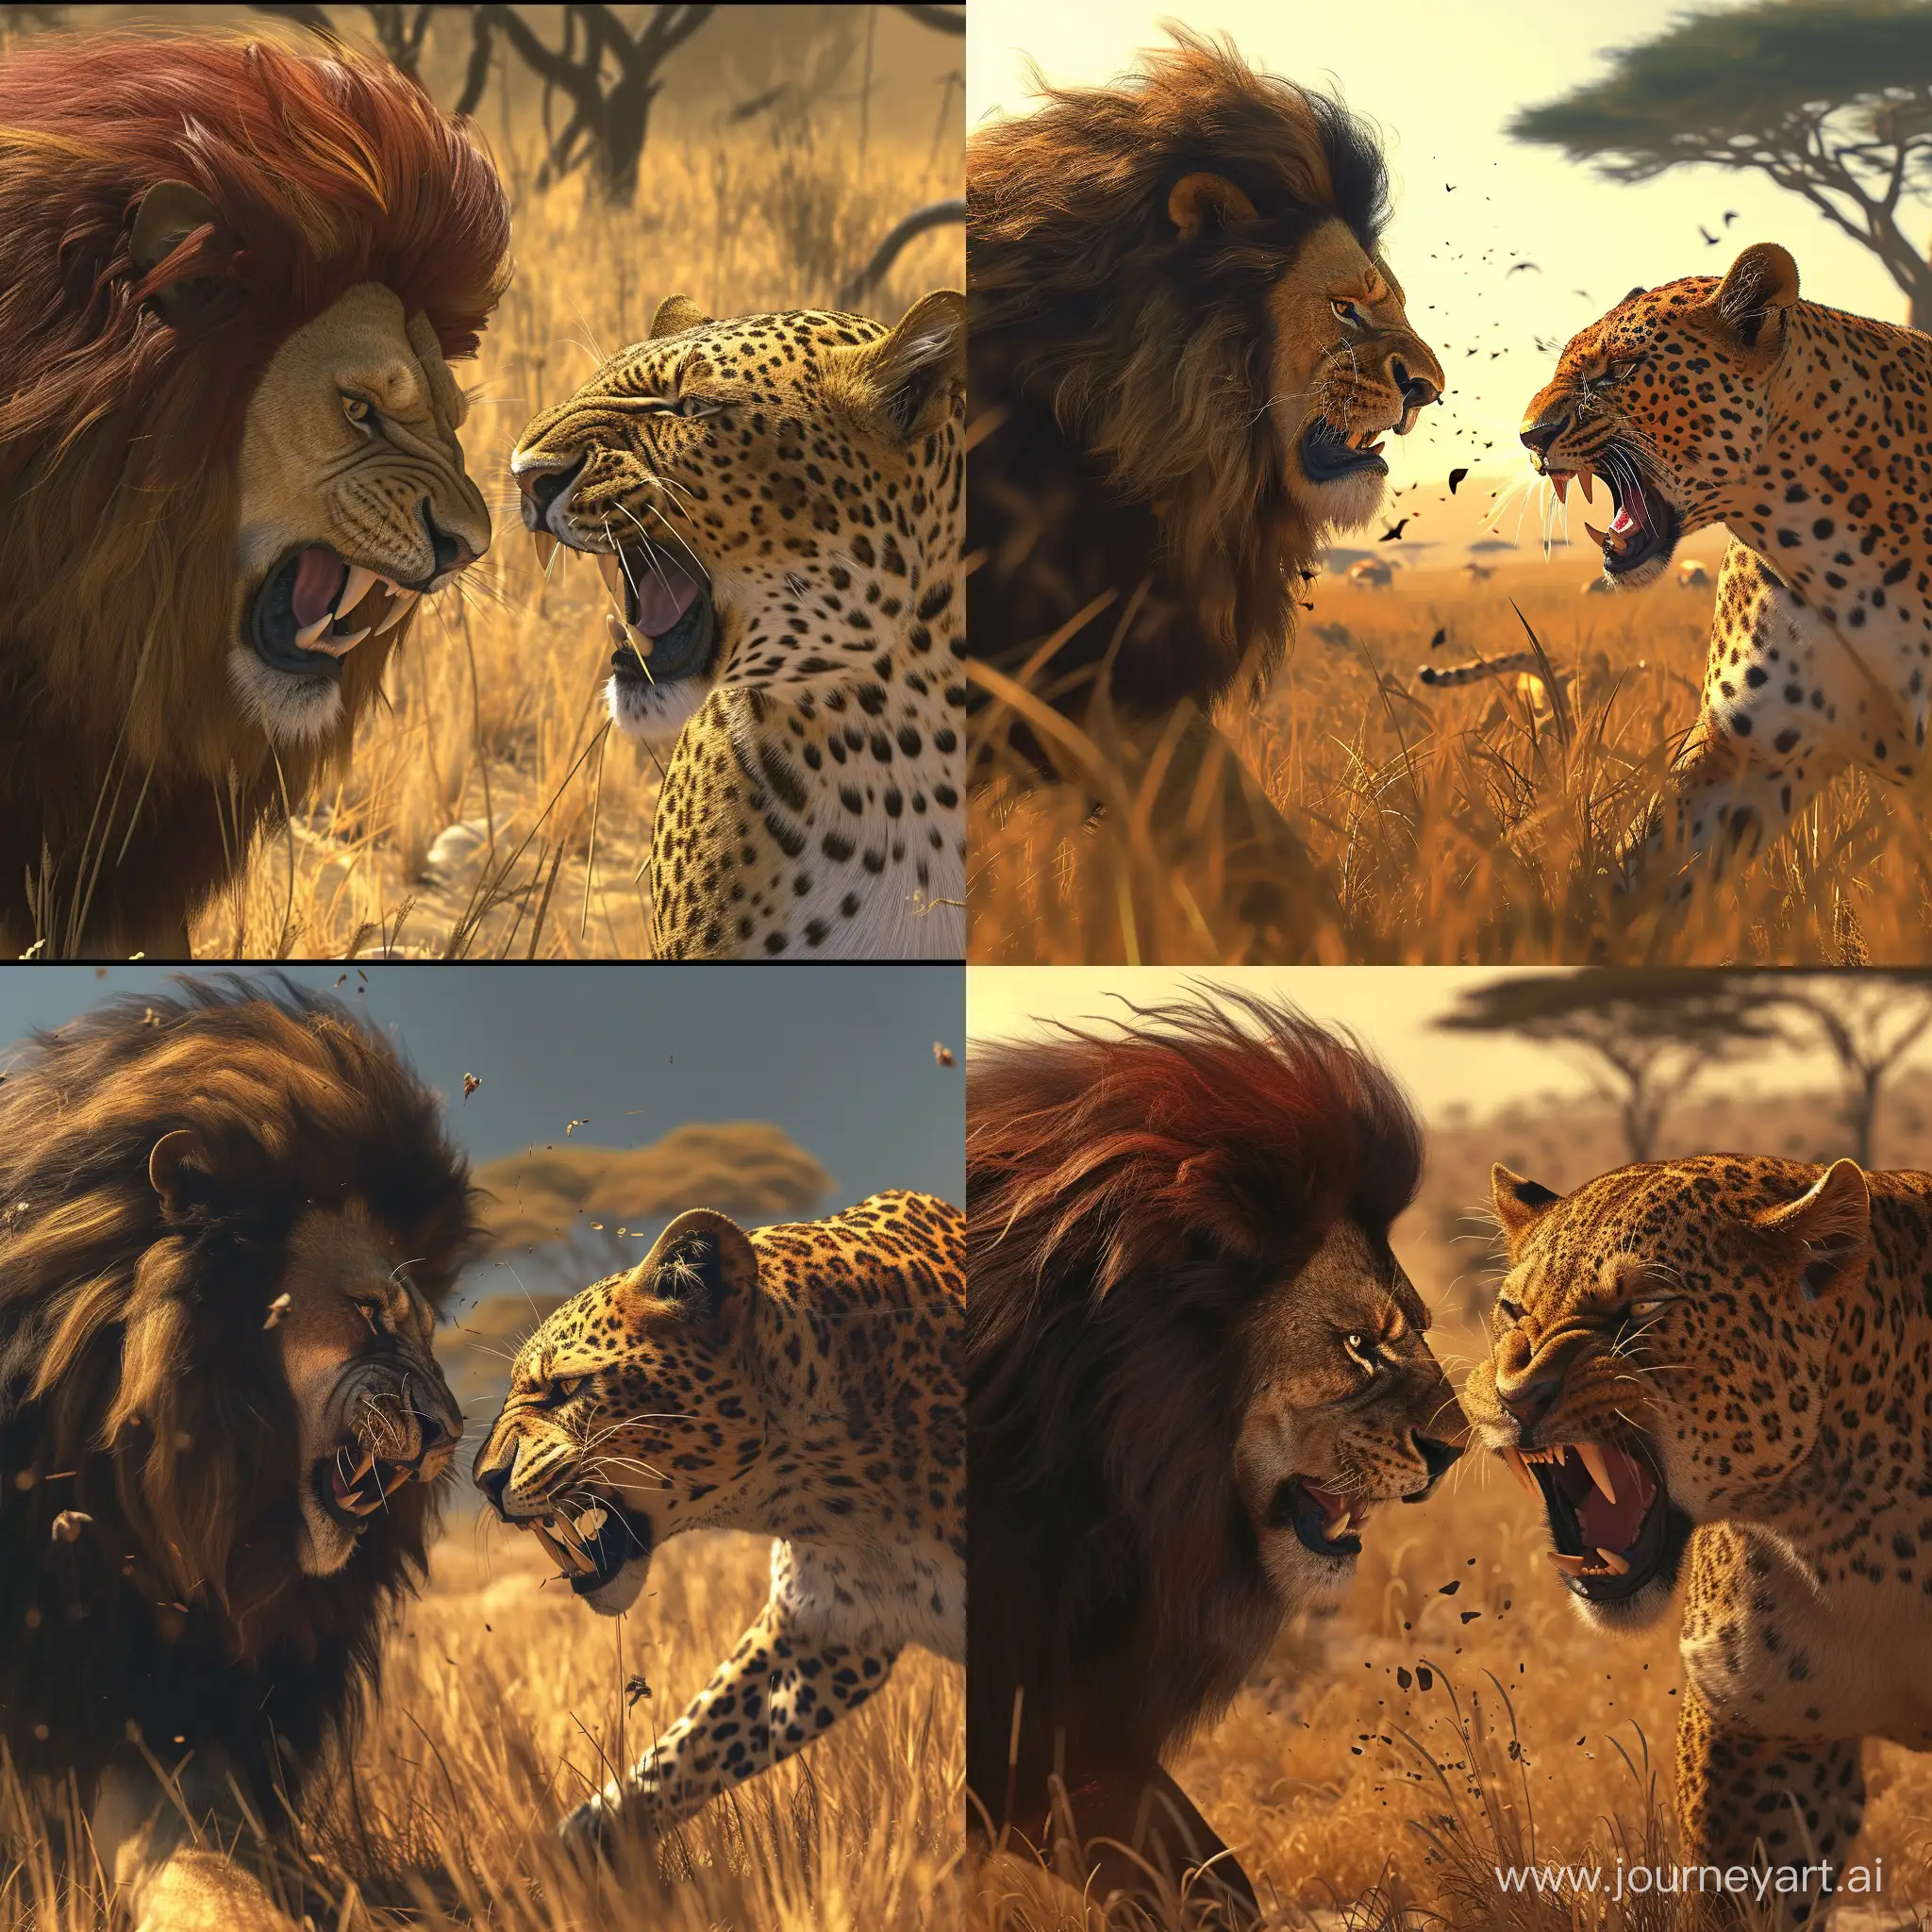 A lion and a leopard are depicted looking at each other very menacingly in a realistic photographic style, with the scene set in the heart of the African savanna. The lion, with its majestic mane and powerful stature, locks eyes with the sleek and agile leopard, both displaying aggressive postures and bared teeth. Their intense gazes convey a sense of primal rivalry and danger as they prepare to engage in a fierce confrontation. The environment is vibrant and dynamic, with tall grass and scattered acacia trees framing the scene against the backdrop of the expansive savanna. The art style prioritizes meticulous detail and lifelike rendering, capturing the texture of the lion's fur and the sleekness of the leopard's coat with remarkable authenticity. The camera angle is carefully chosen to capture the tension between the two predators, emphasizing their formidable presence in the wild. Rendered with high resolution and naturalistic lighting to enhance the realism of the scene.